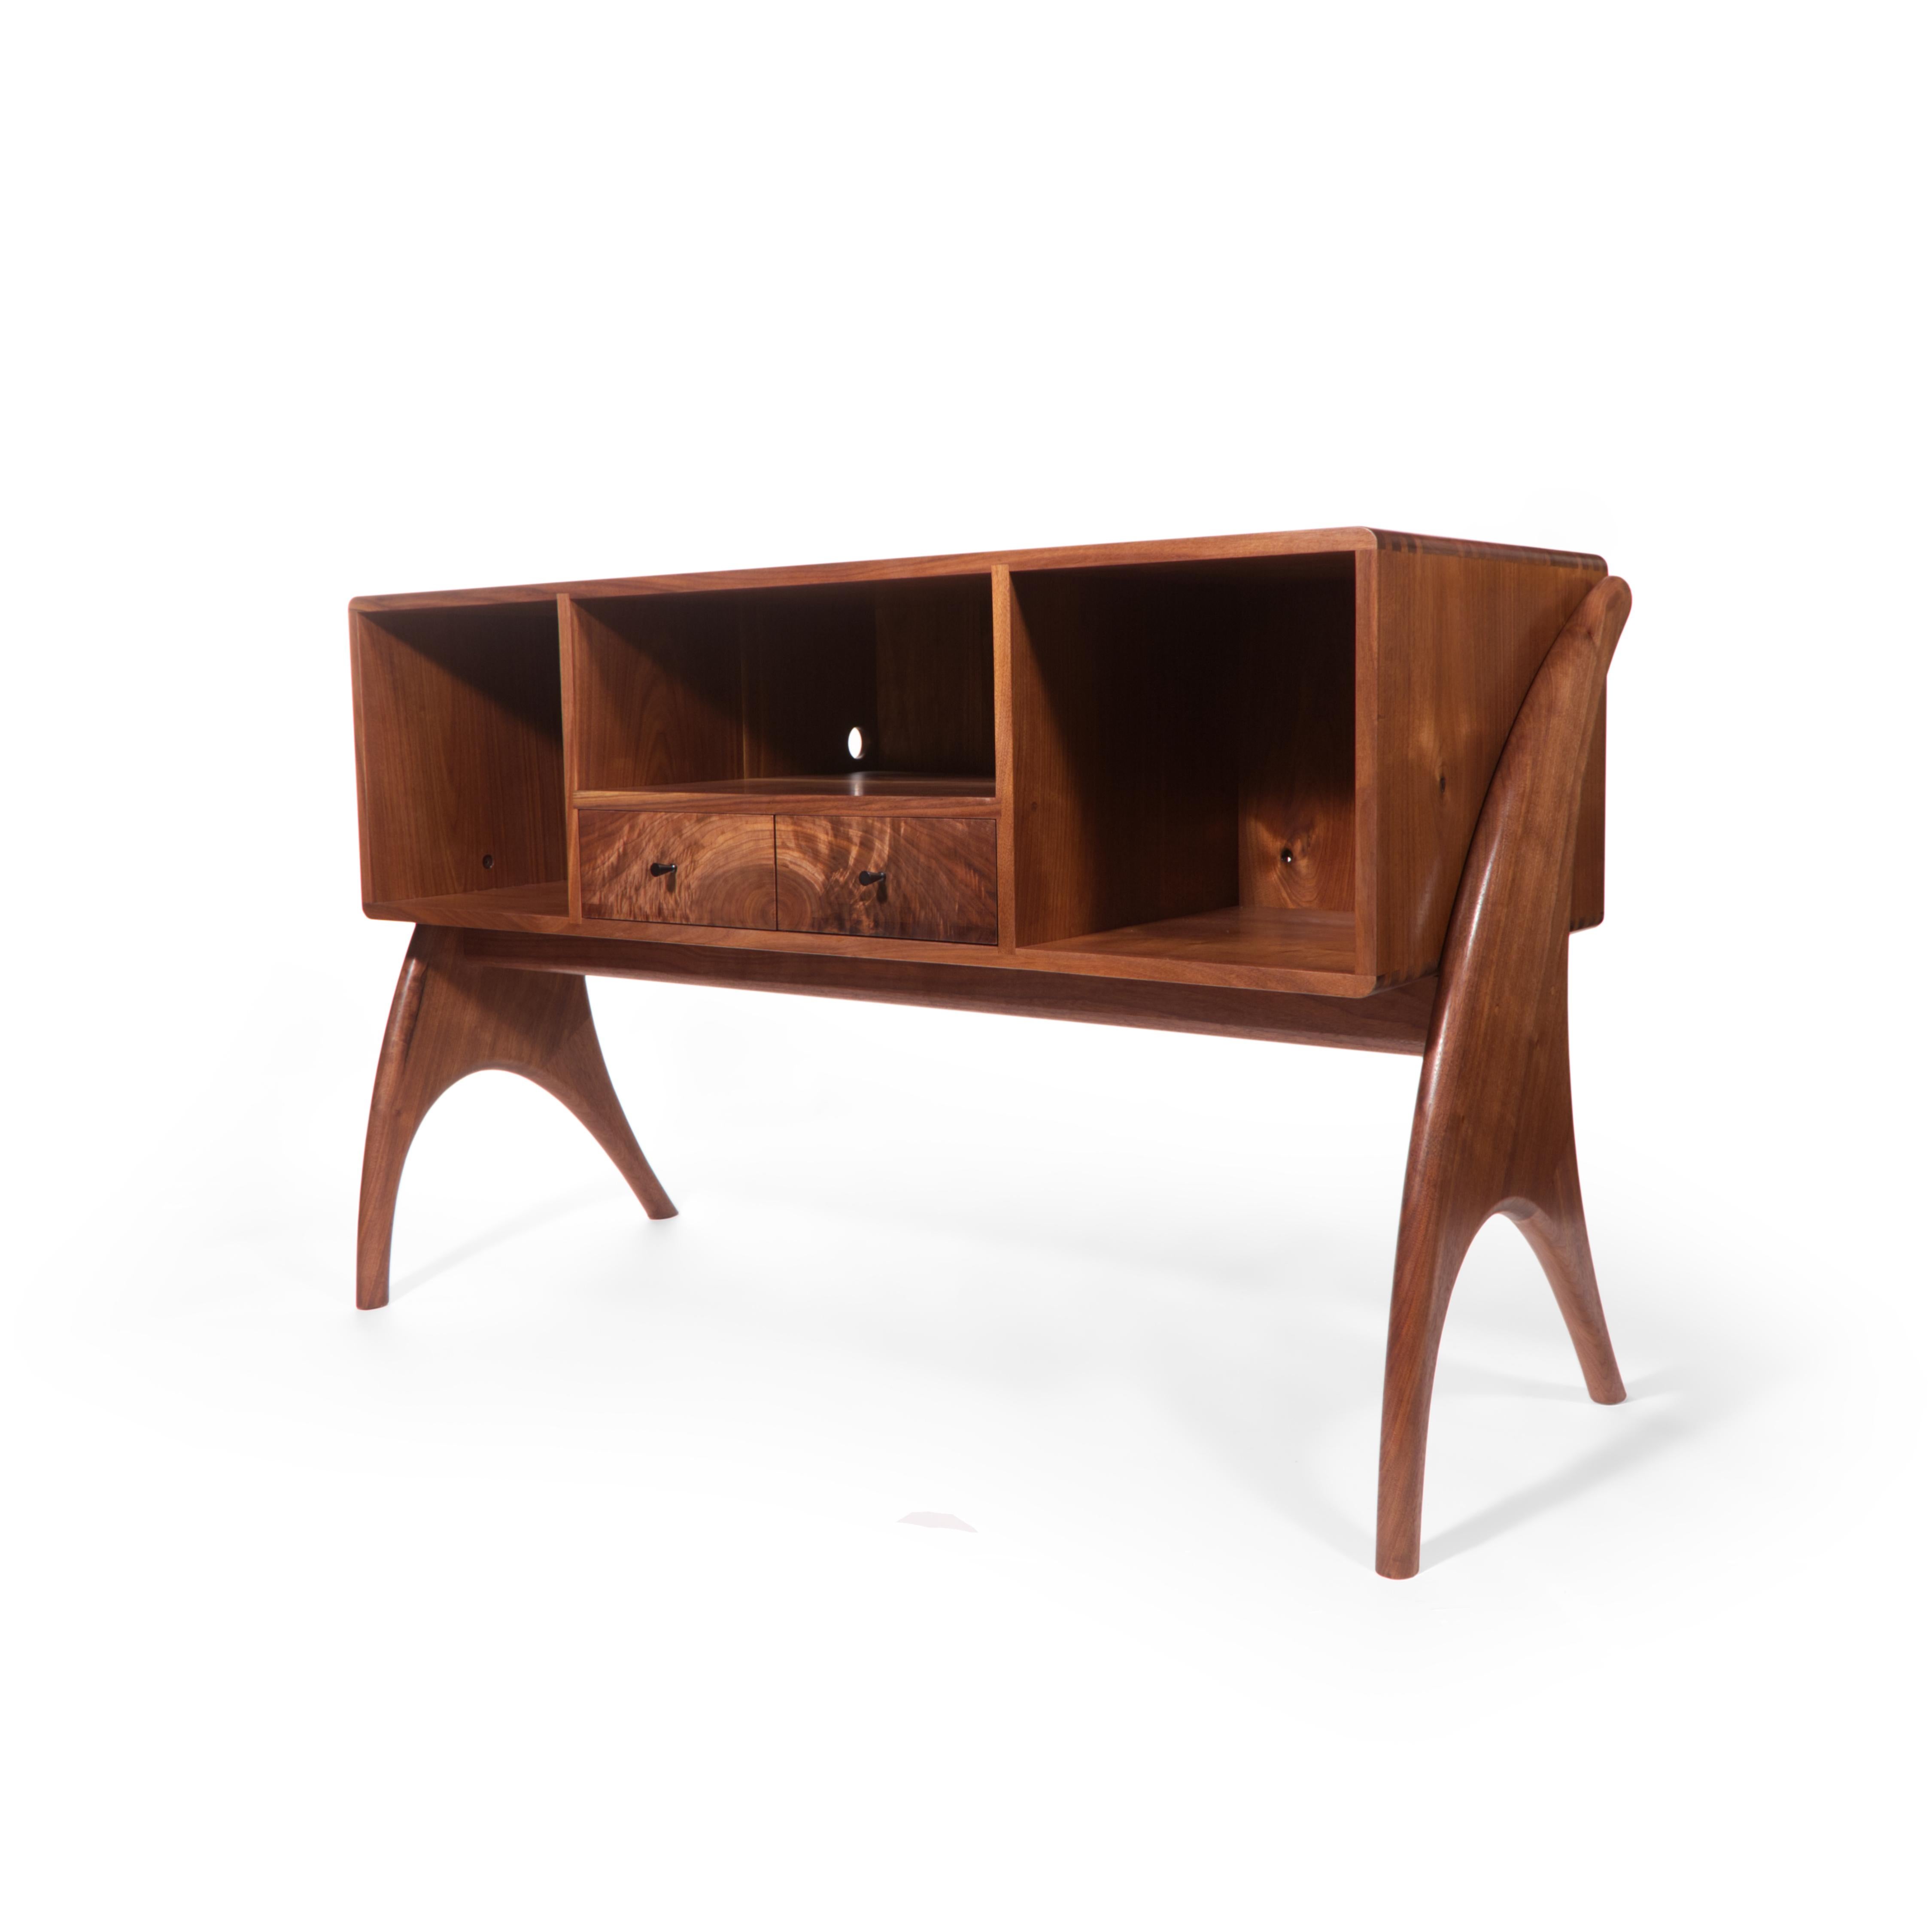 American Handcrafted Midcentury Stye Turntable and Record Cabinet For Sale